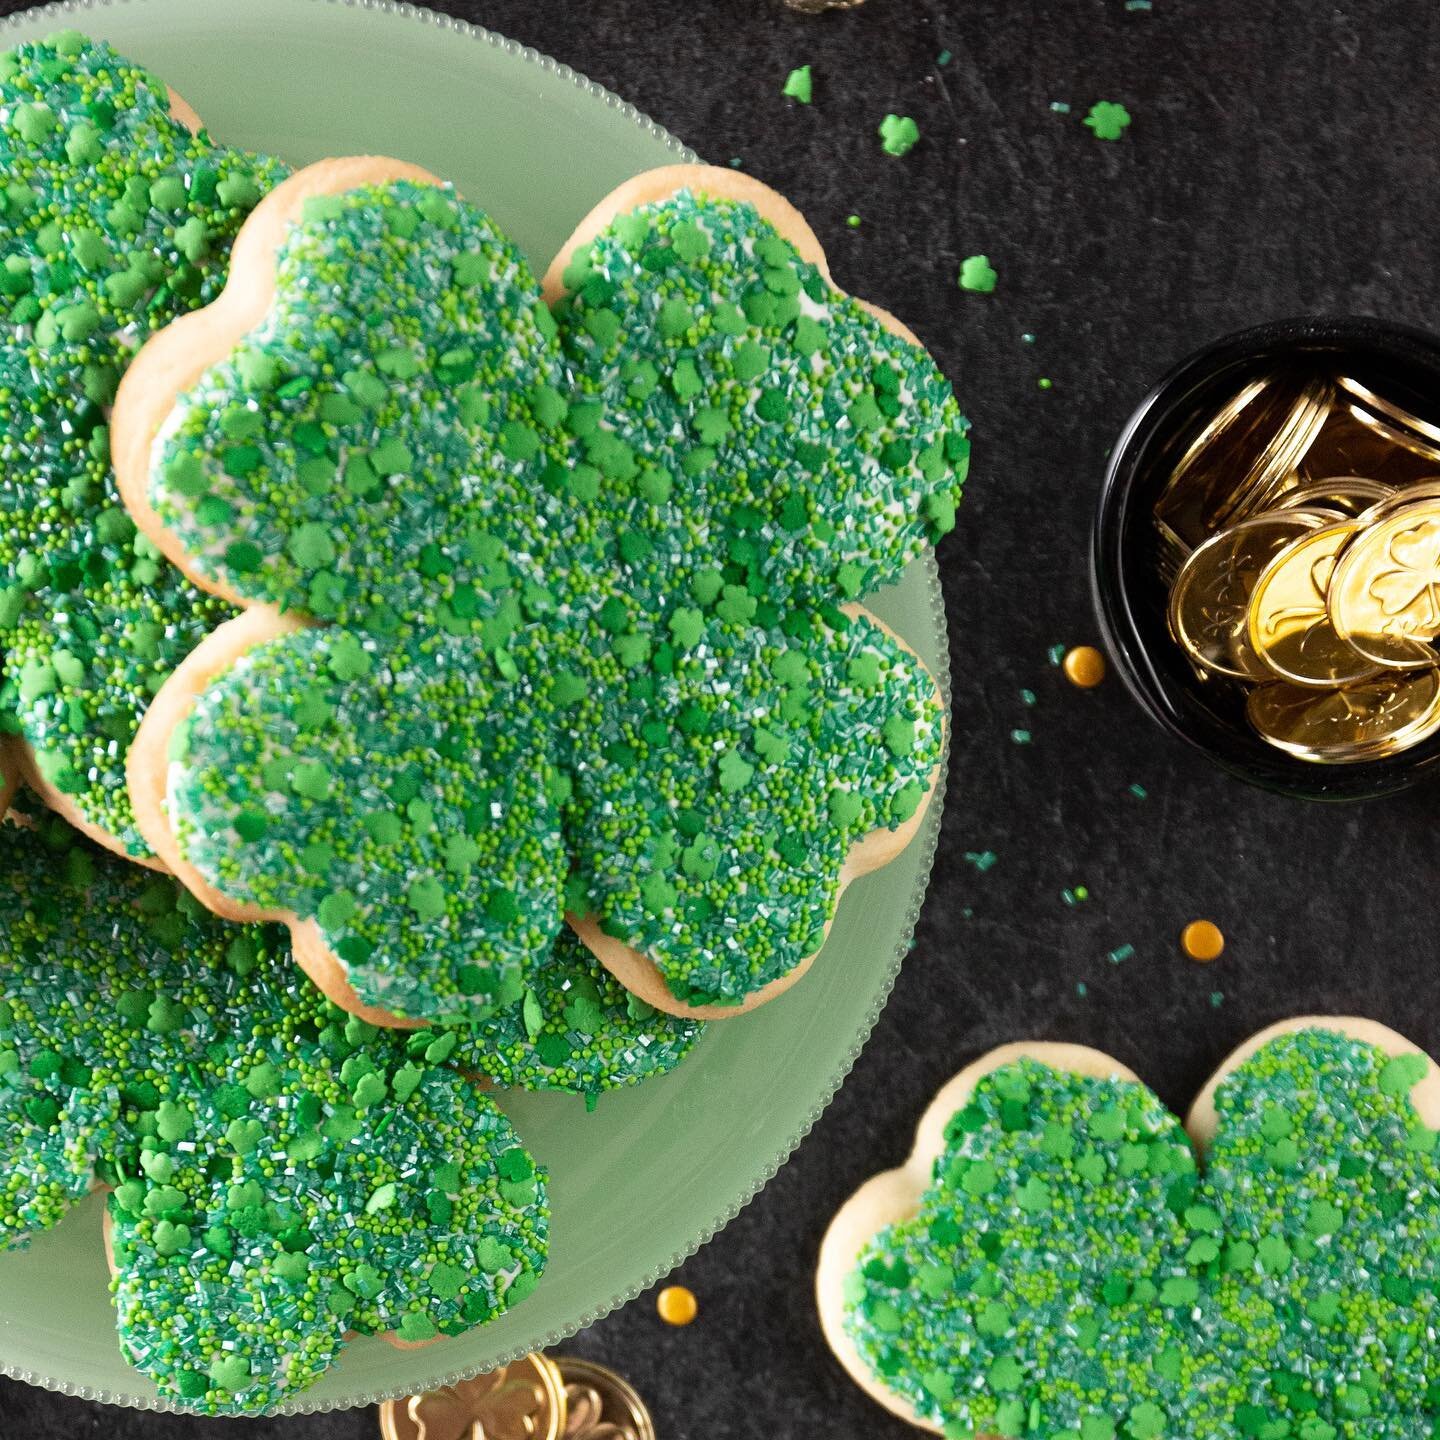 Shamrock cookies are here!! 🍀 Stop by either location today to grab some festive treats!! 🥳💚

📸: @amy.sheree #livelifeonecupcakeatatime #livelifeonecookieatatime #designerdessertsbakery